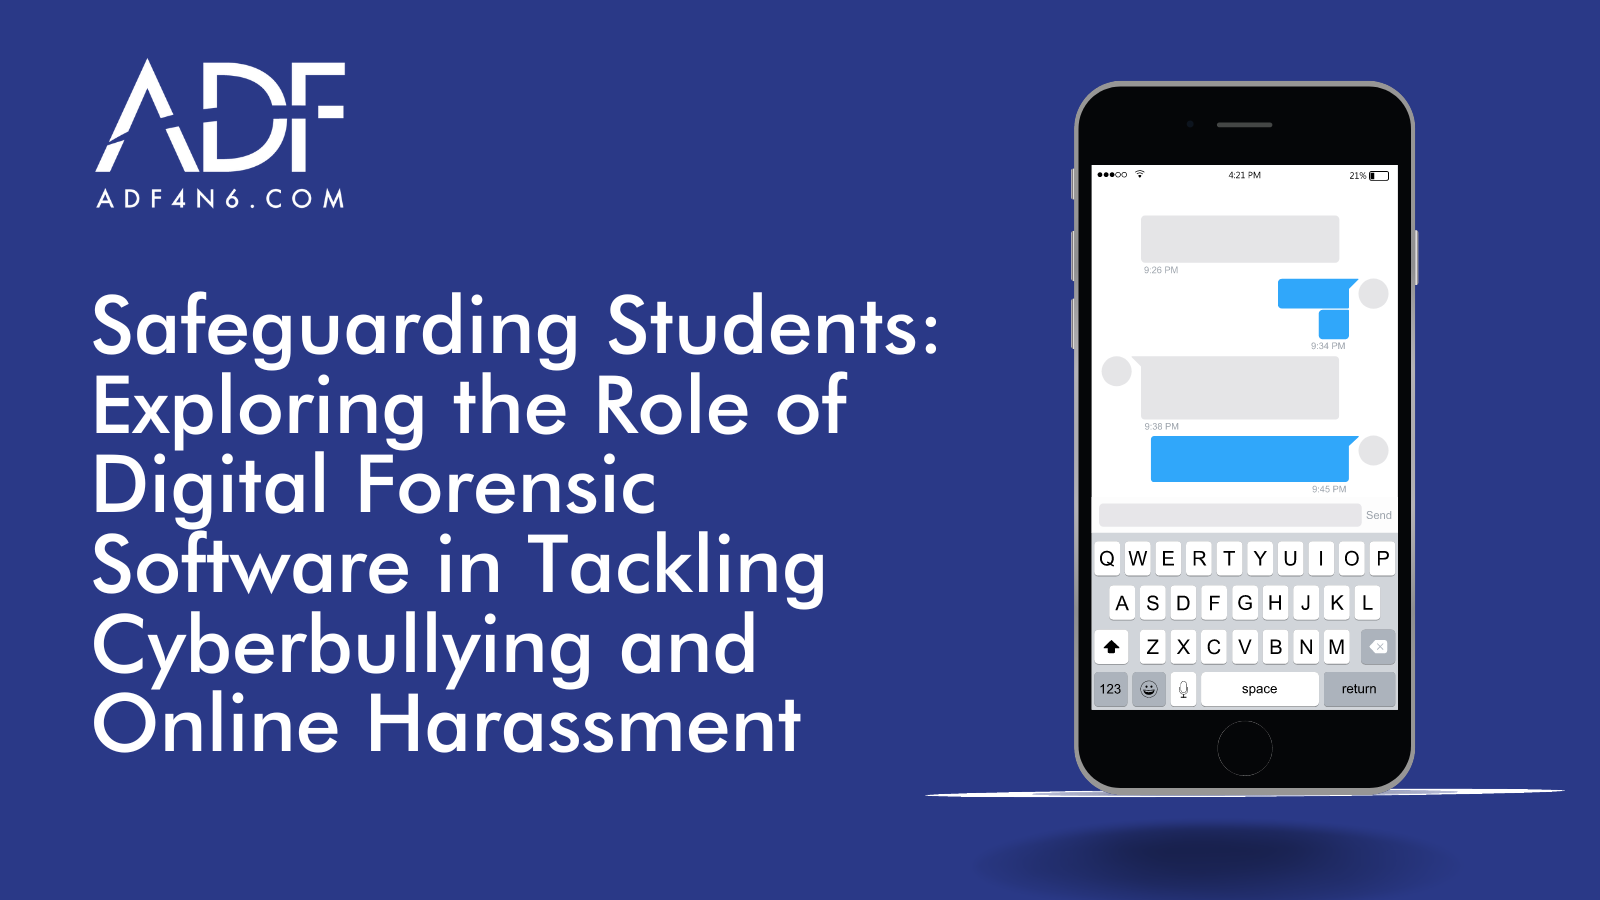 Safeguarding Students: Exploring the Role of Digital Forensic Software in Tackling Cyberbullying and Online Harassment